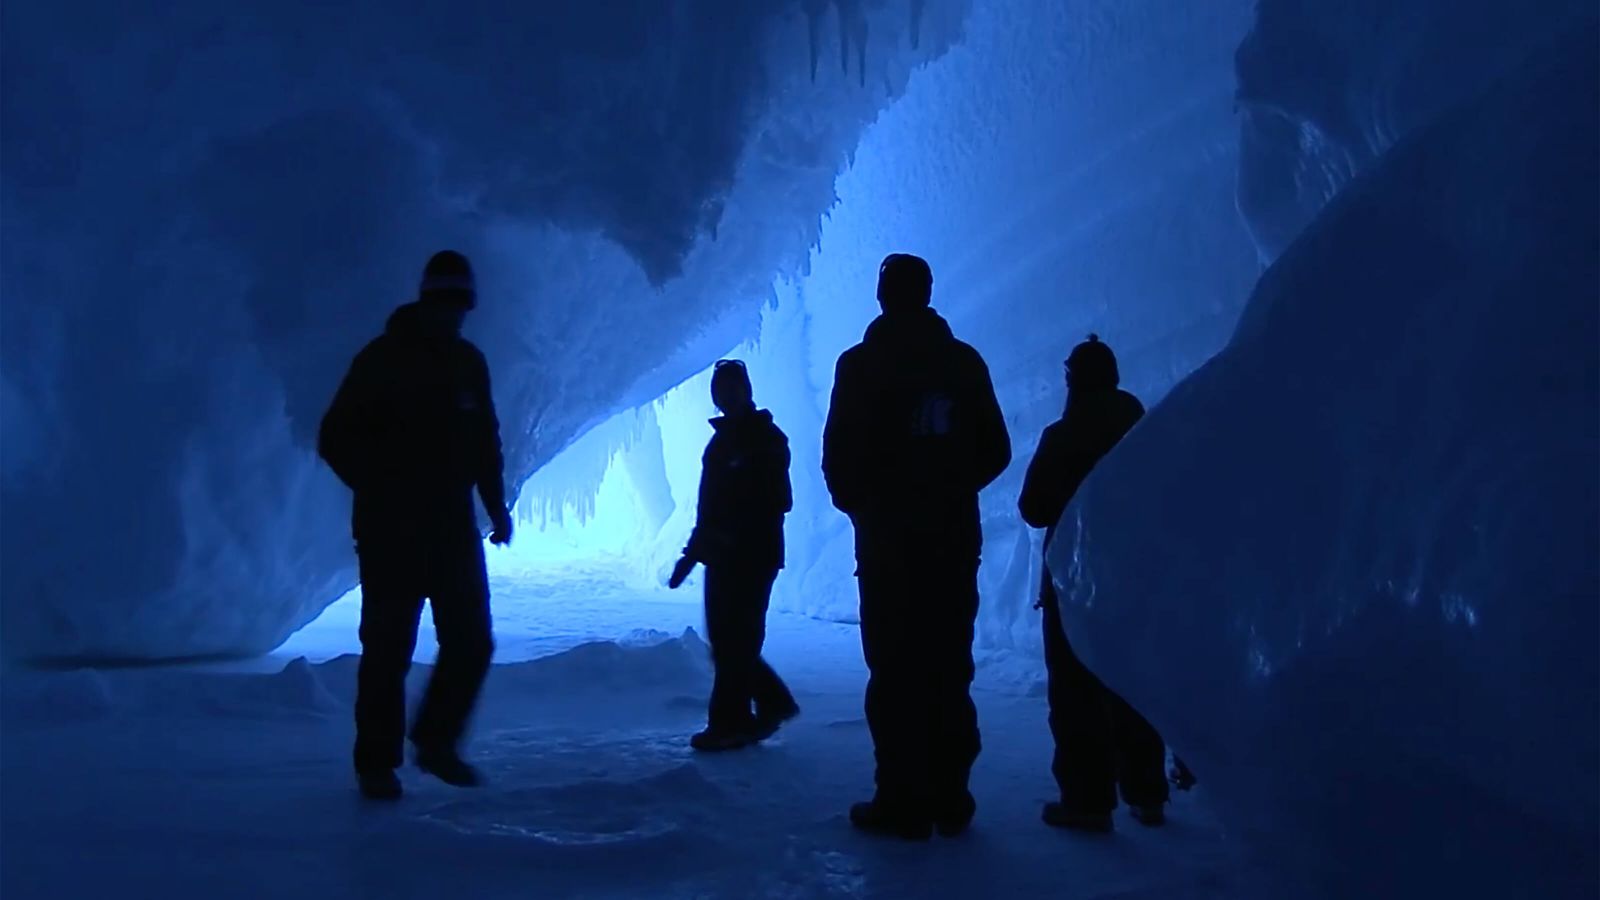 Human silhouettes explore an intensely blue ice cave.